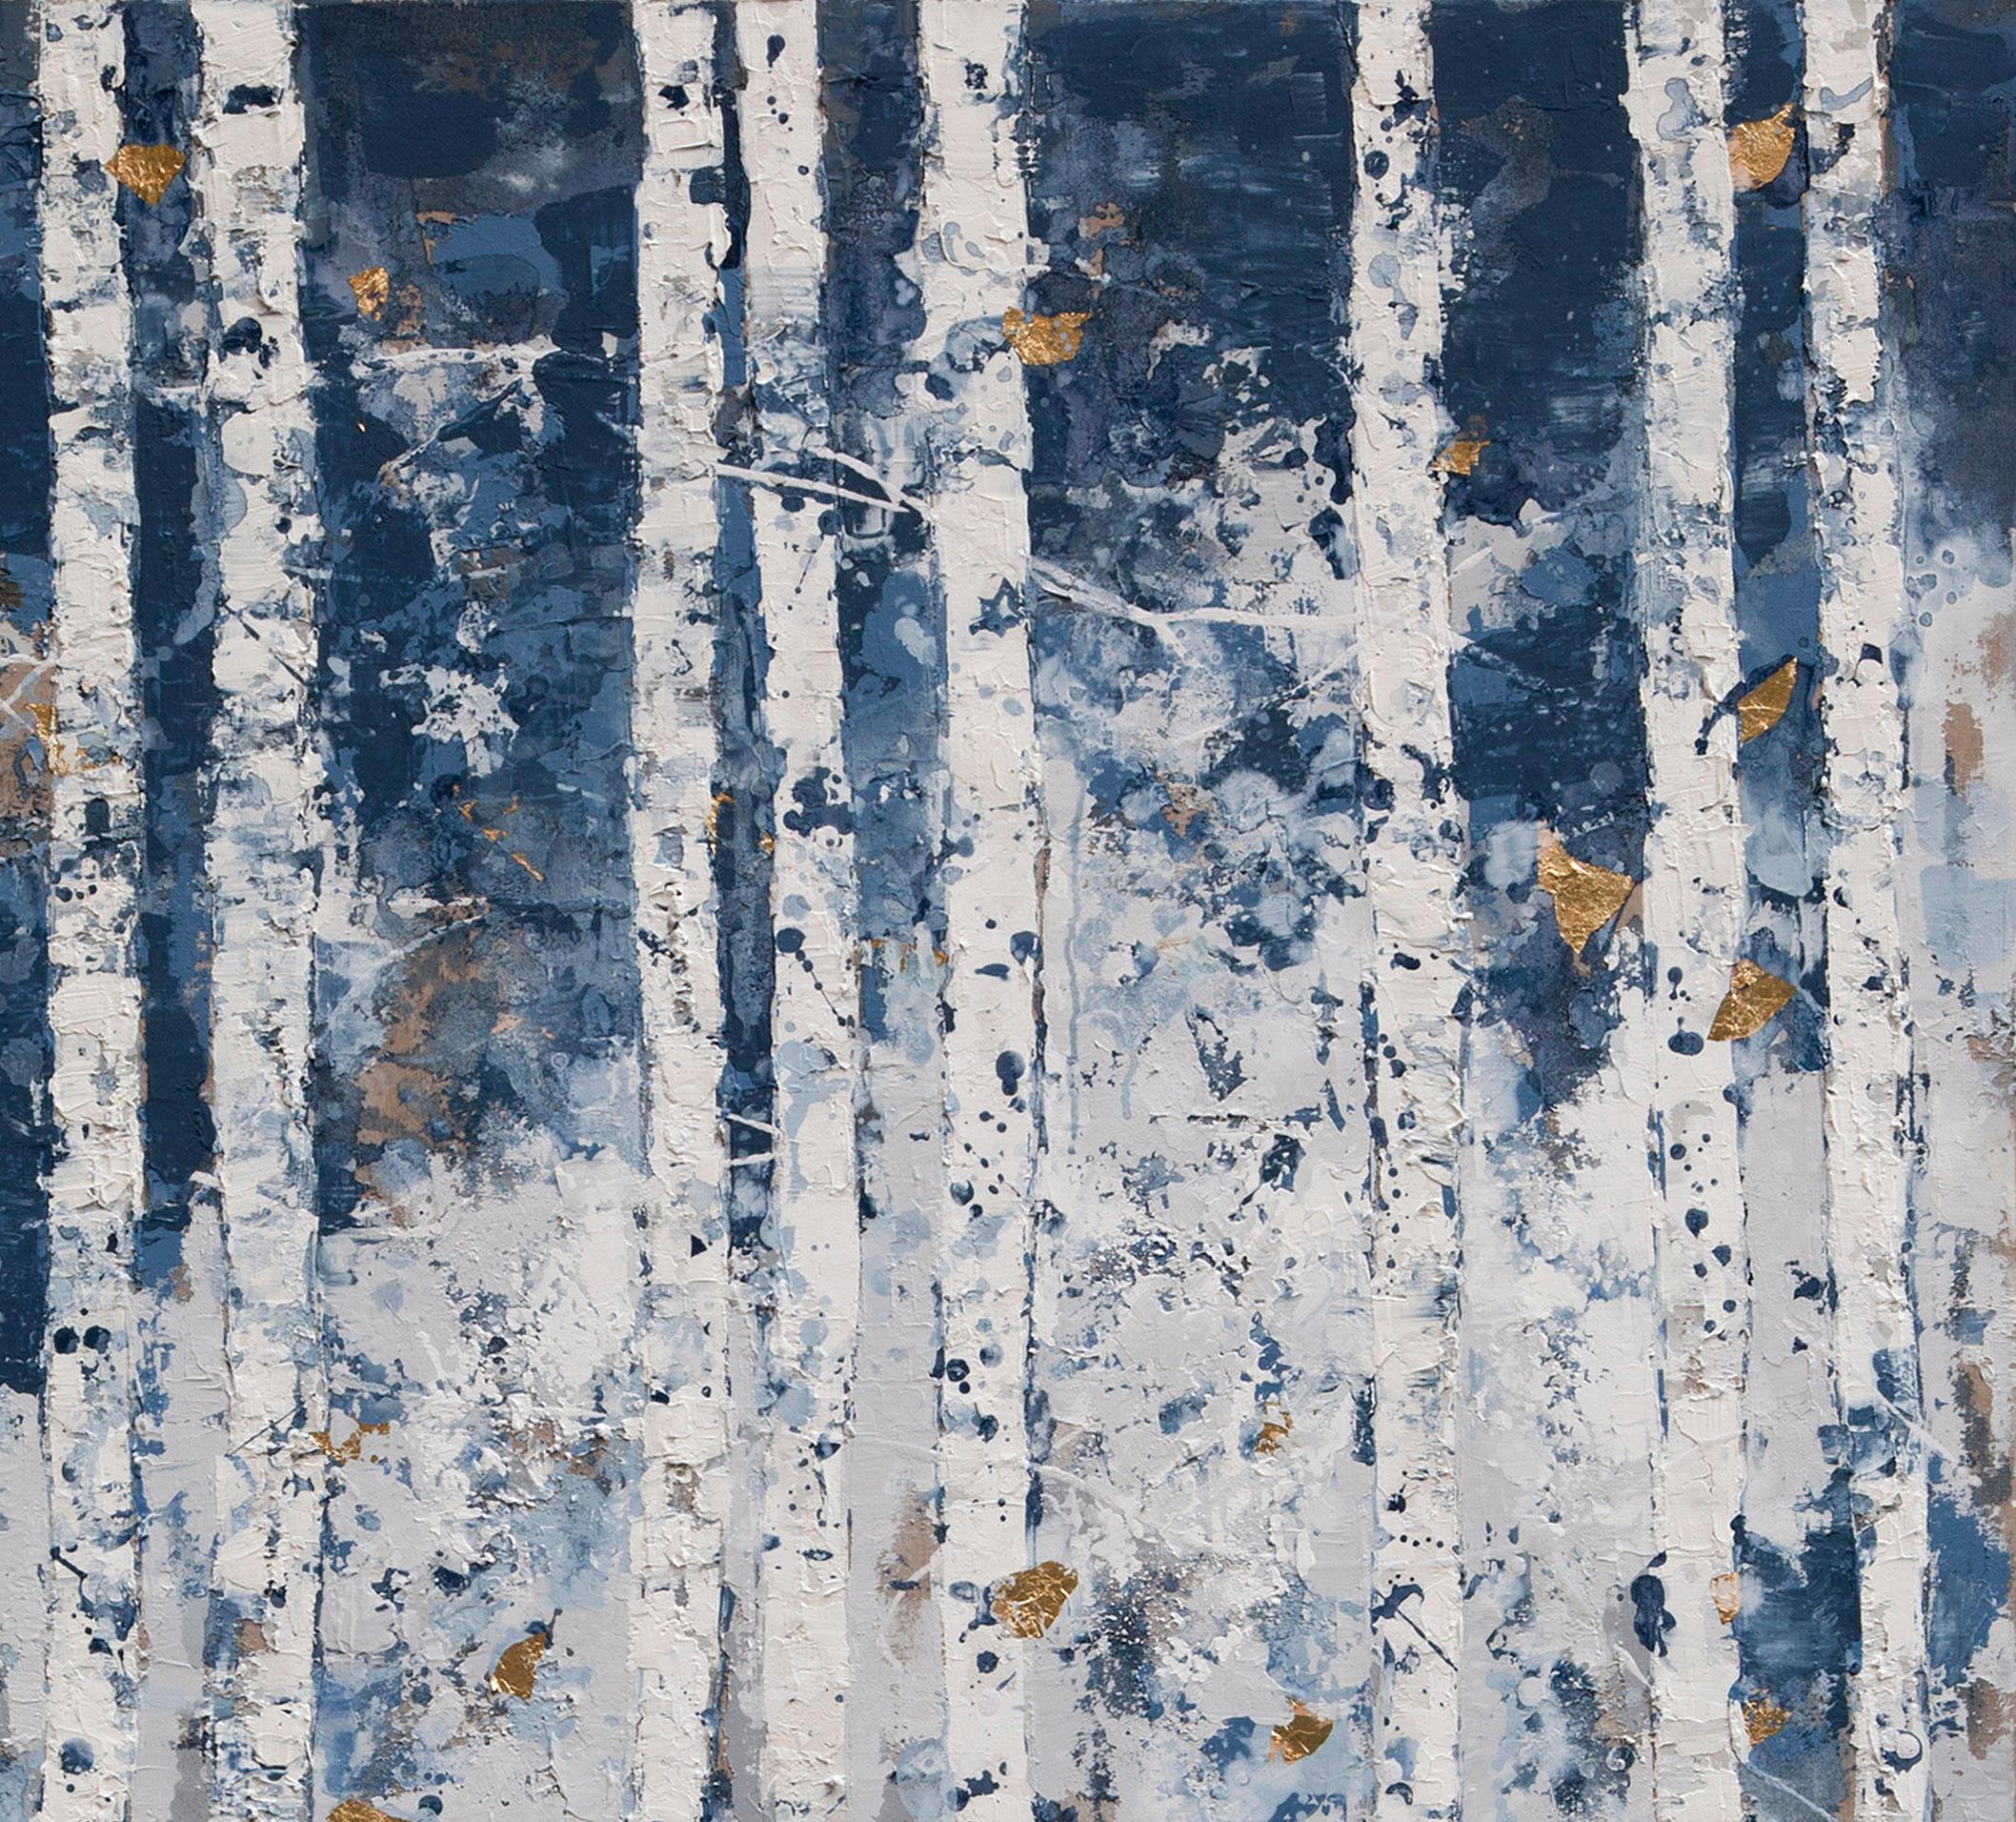 First Snowfall - 21st Century, Contemporary, Figurative Oil Painting, Gold Leaf 1